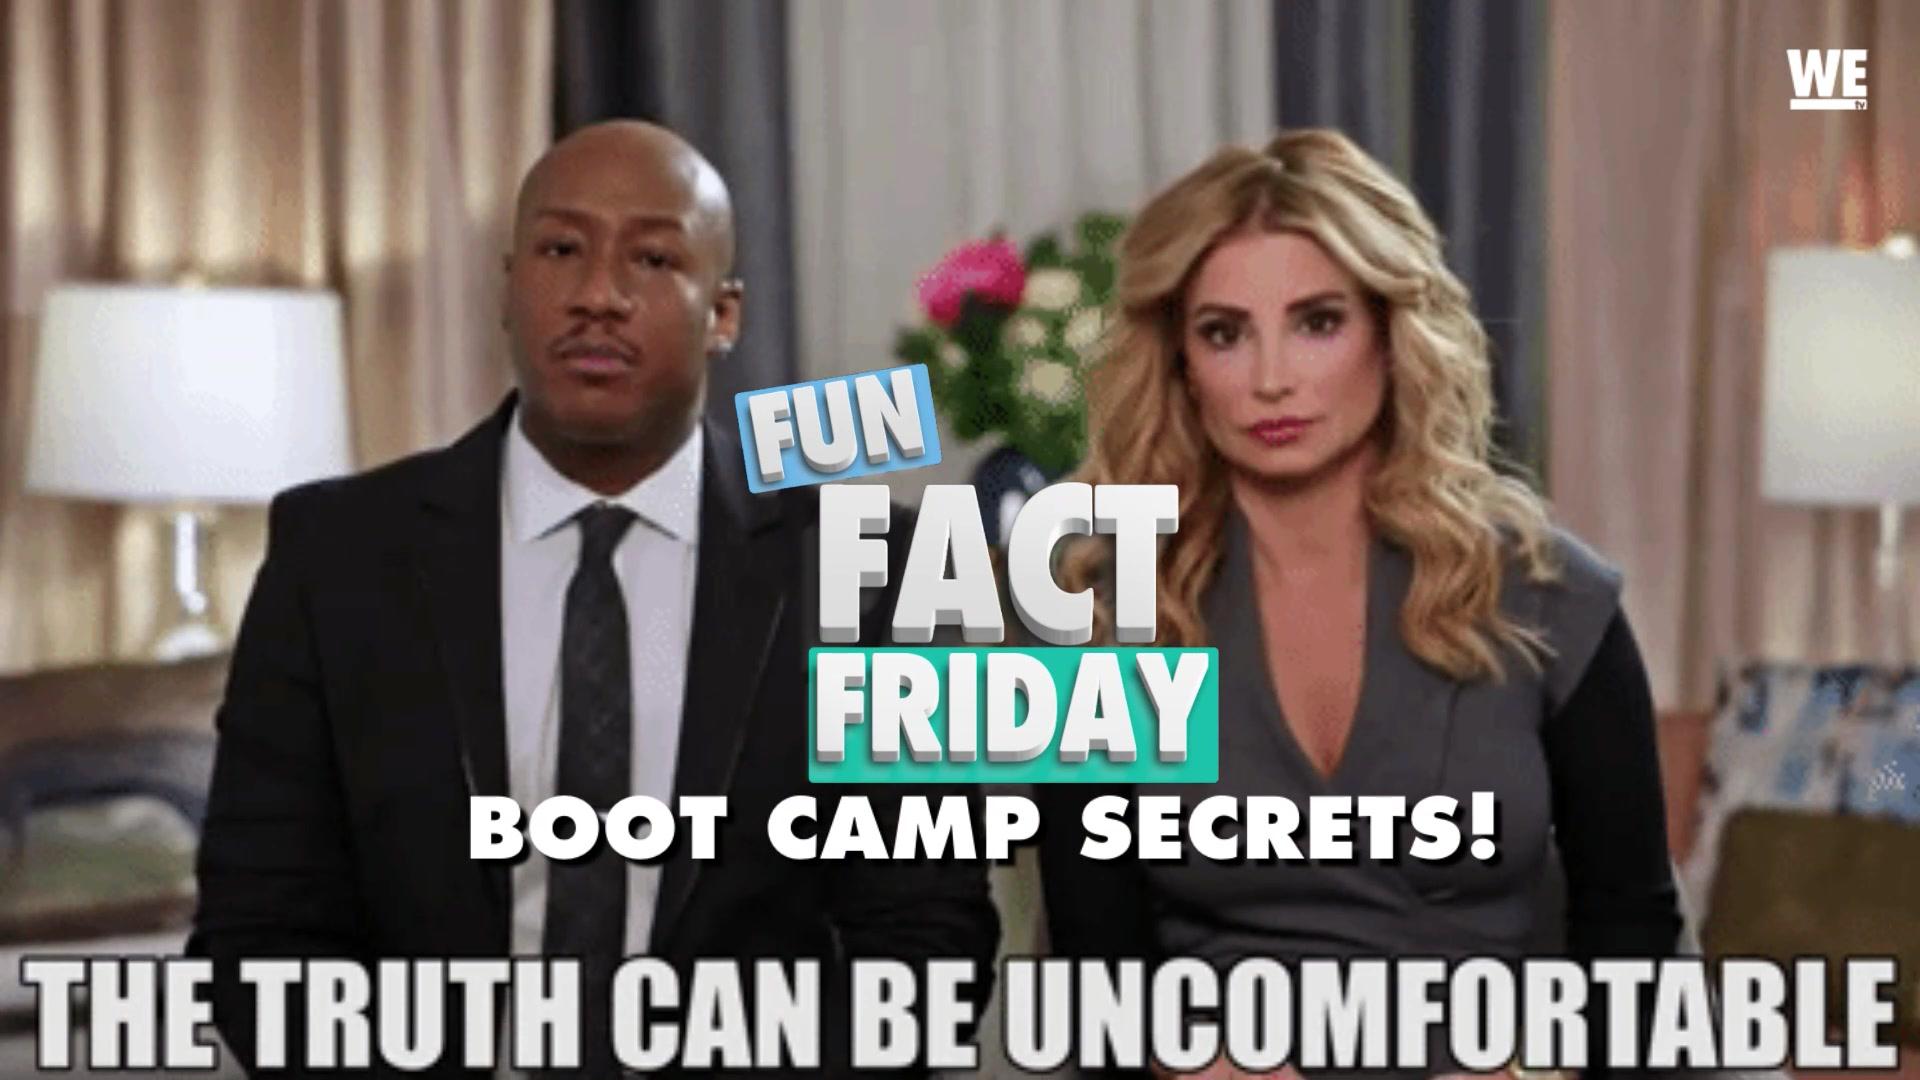 #FunFactFriday: Marriage Boot Camp Secrets